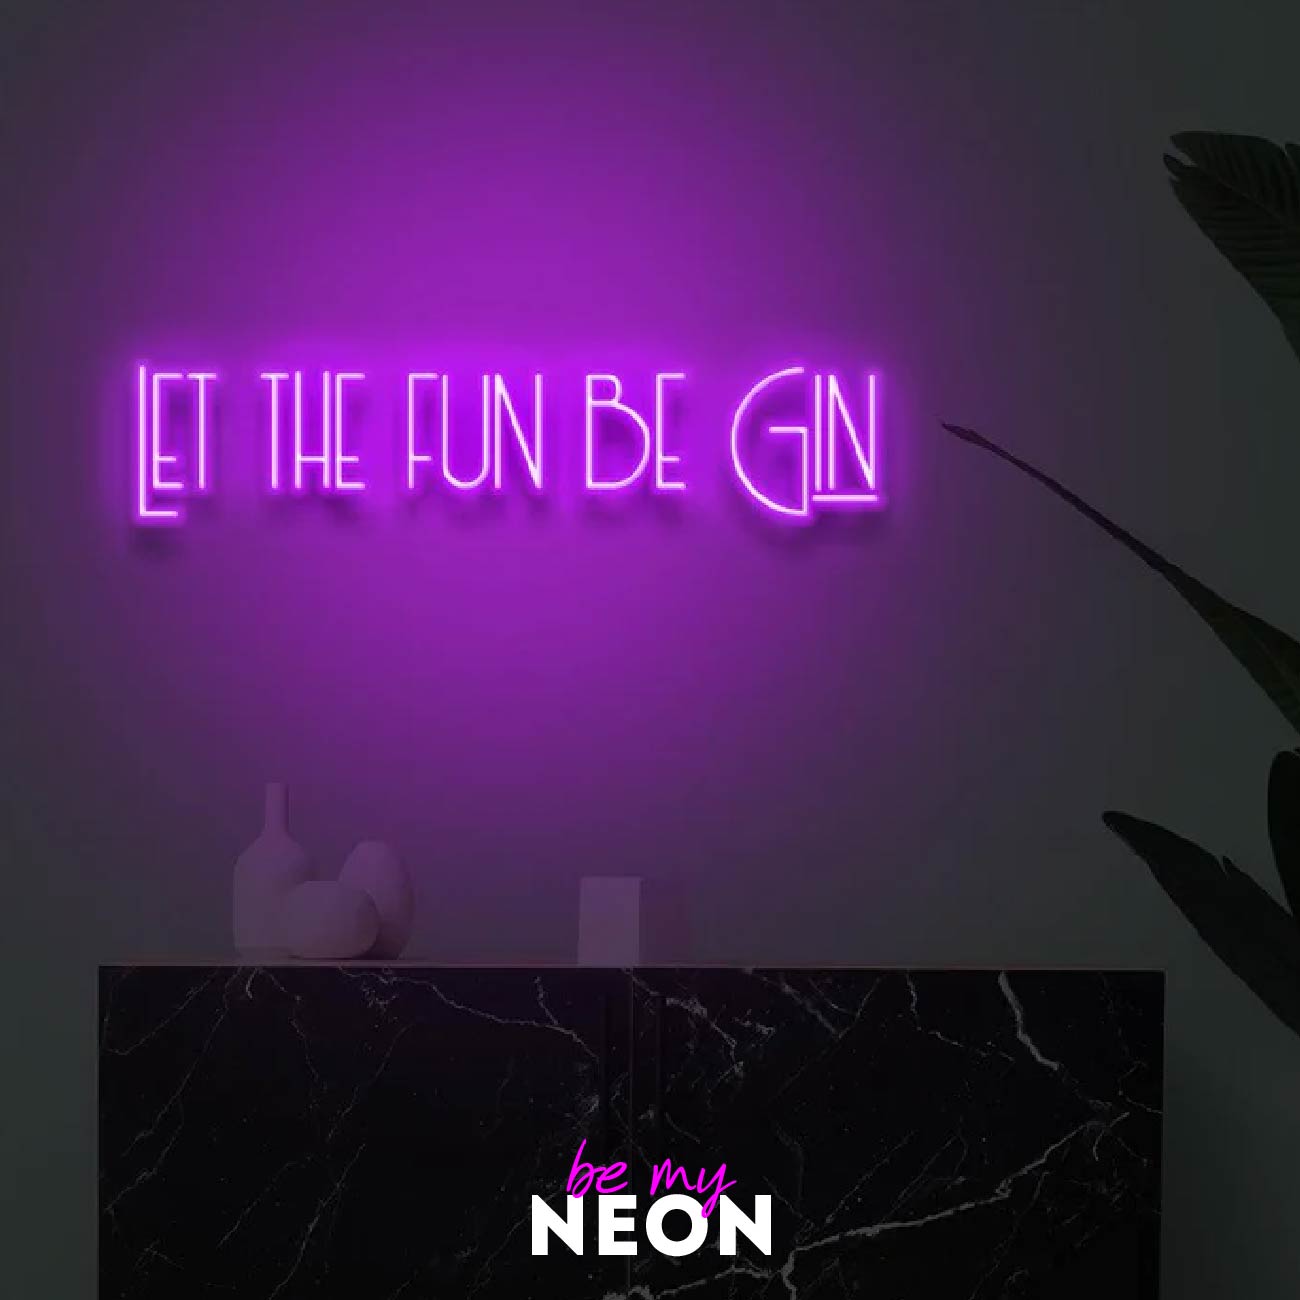 "Let the fun be Gin" LED Neonschild